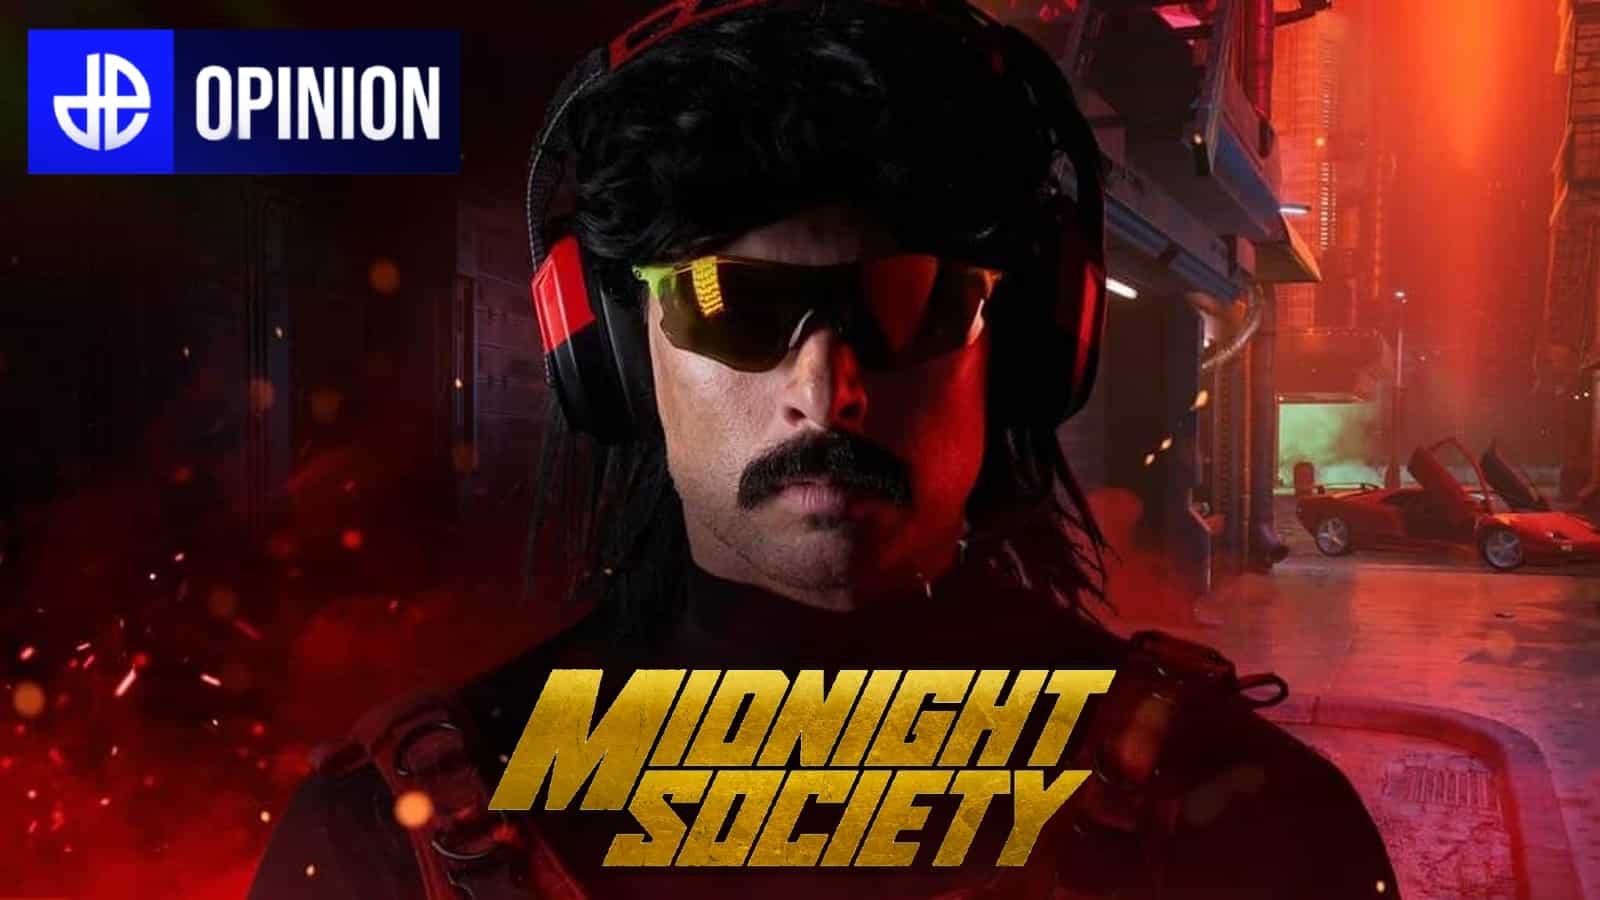 Dr Disrespect with Midnight Society logo and opinion tag